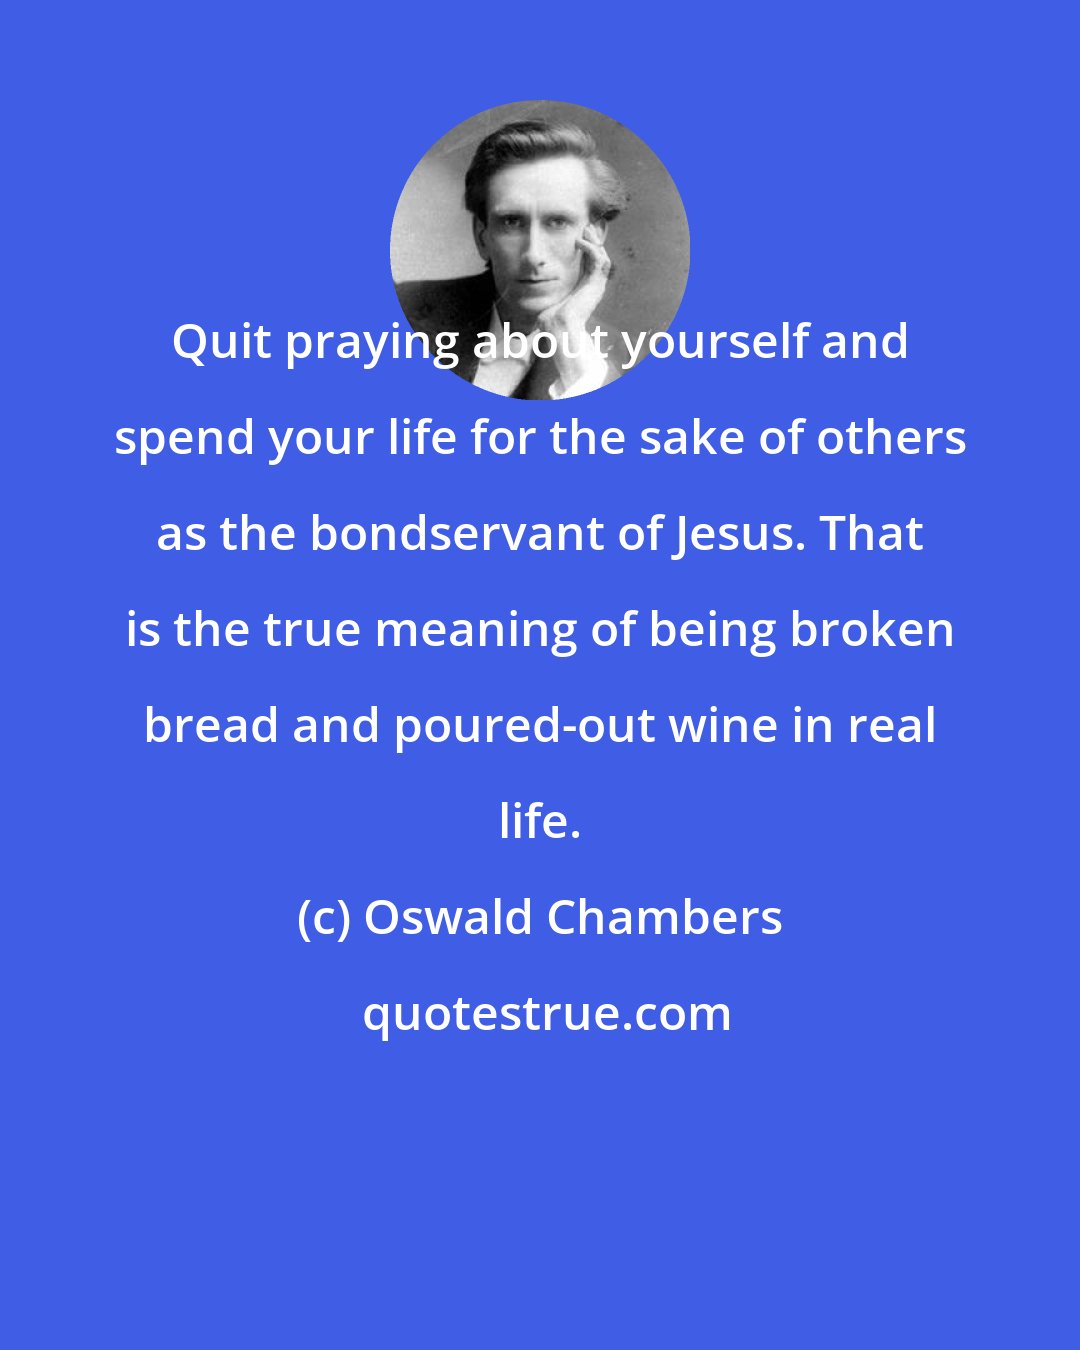 Oswald Chambers: Quit praying about yourself and spend your life for the sake of others as the bondservant of Jesus. That is the true meaning of being broken bread and poured-out wine in real life.